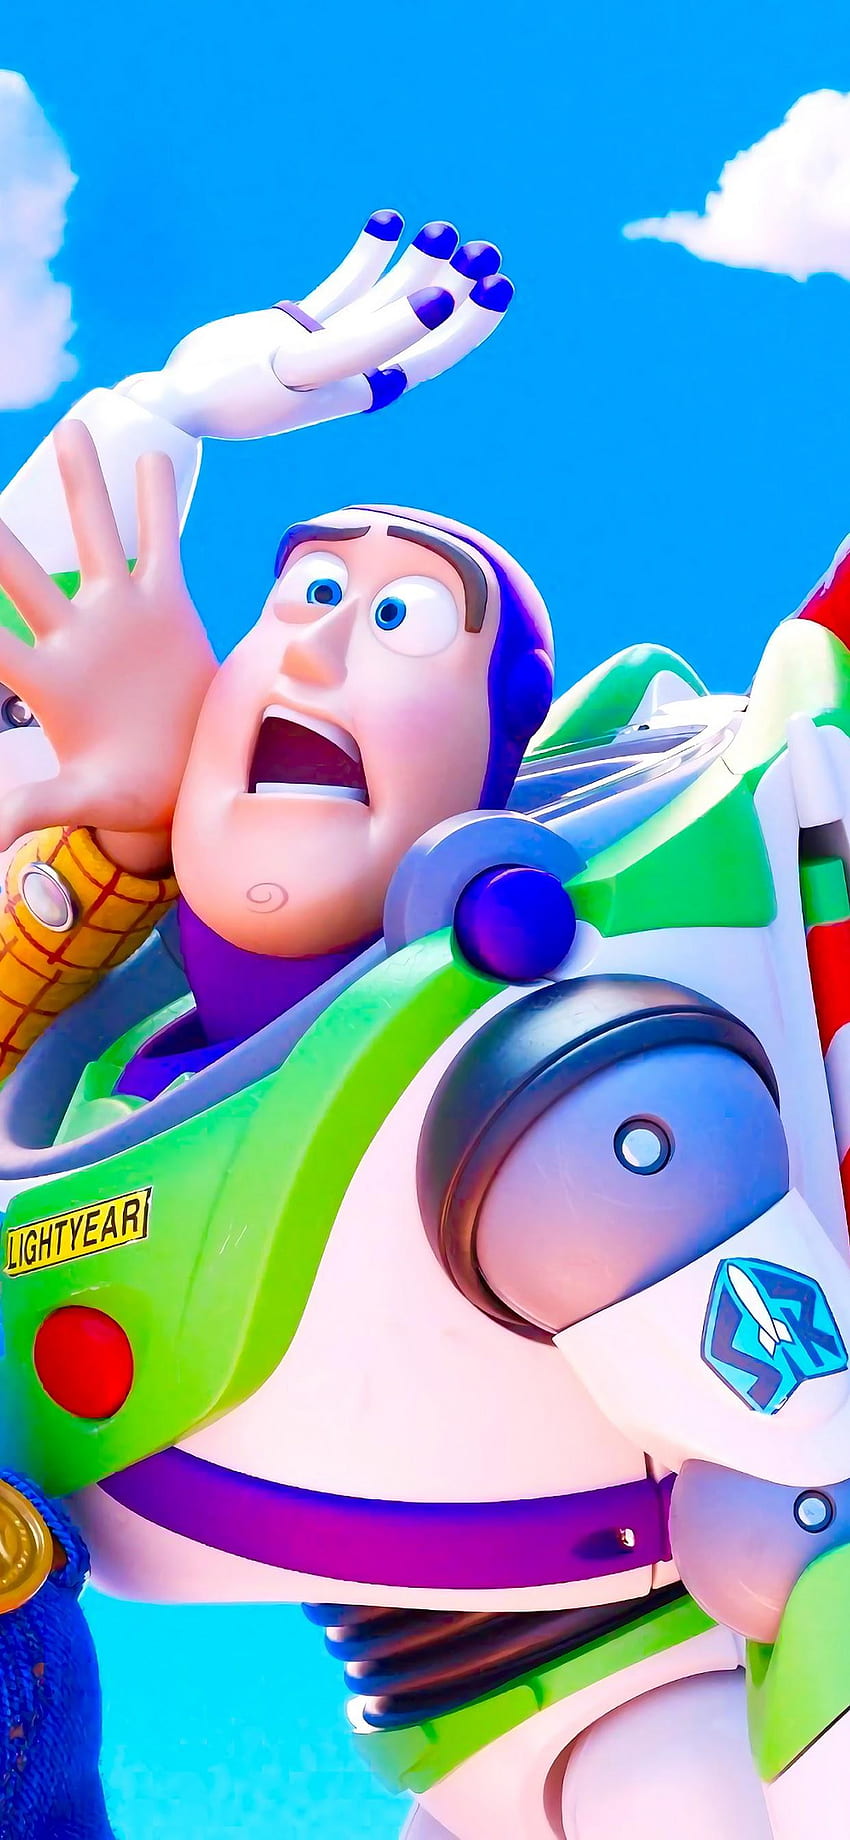 Wallpaper ID 308512  Movie Toy Story 4 Phone Wallpaper Buzz Lightyear  1440x3120 free download